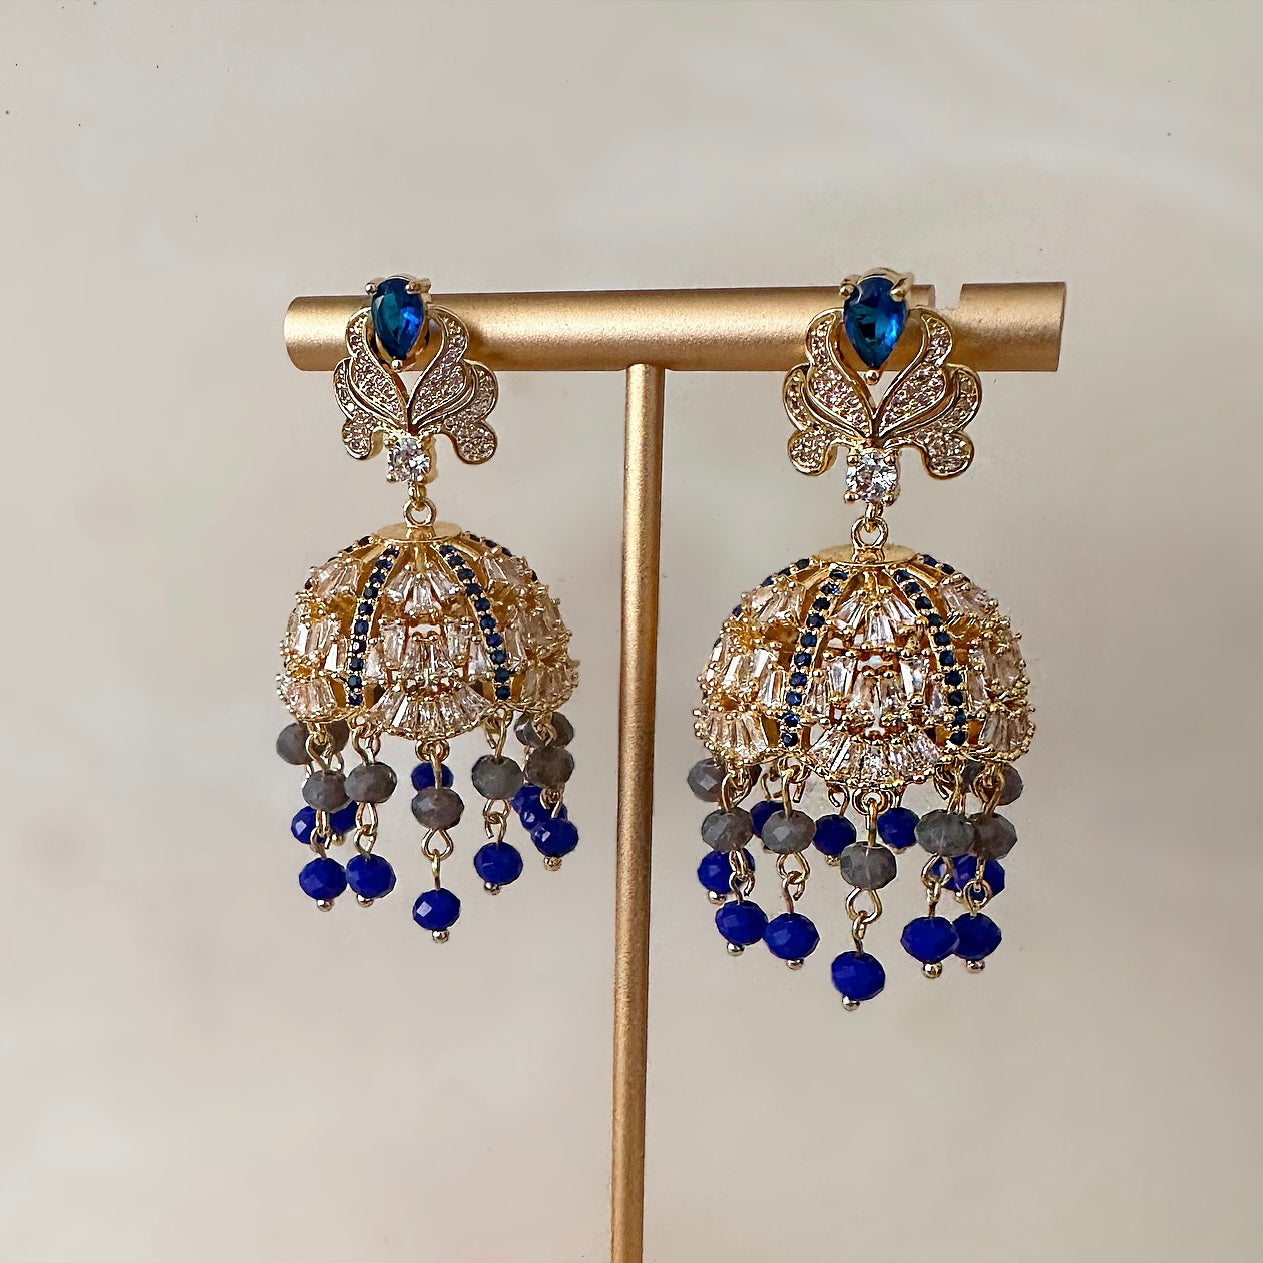 Graceful and glamorous, the Maria Blue Crystal Jhumki Earrings offer unparalleled elegance. Crafted with expert detail, these earrings sparkle with cubic zirconia and are complemented with their stunning blue grey beads for extra detail. Turn heads with their high-shine finish. Earring Drop 5cm